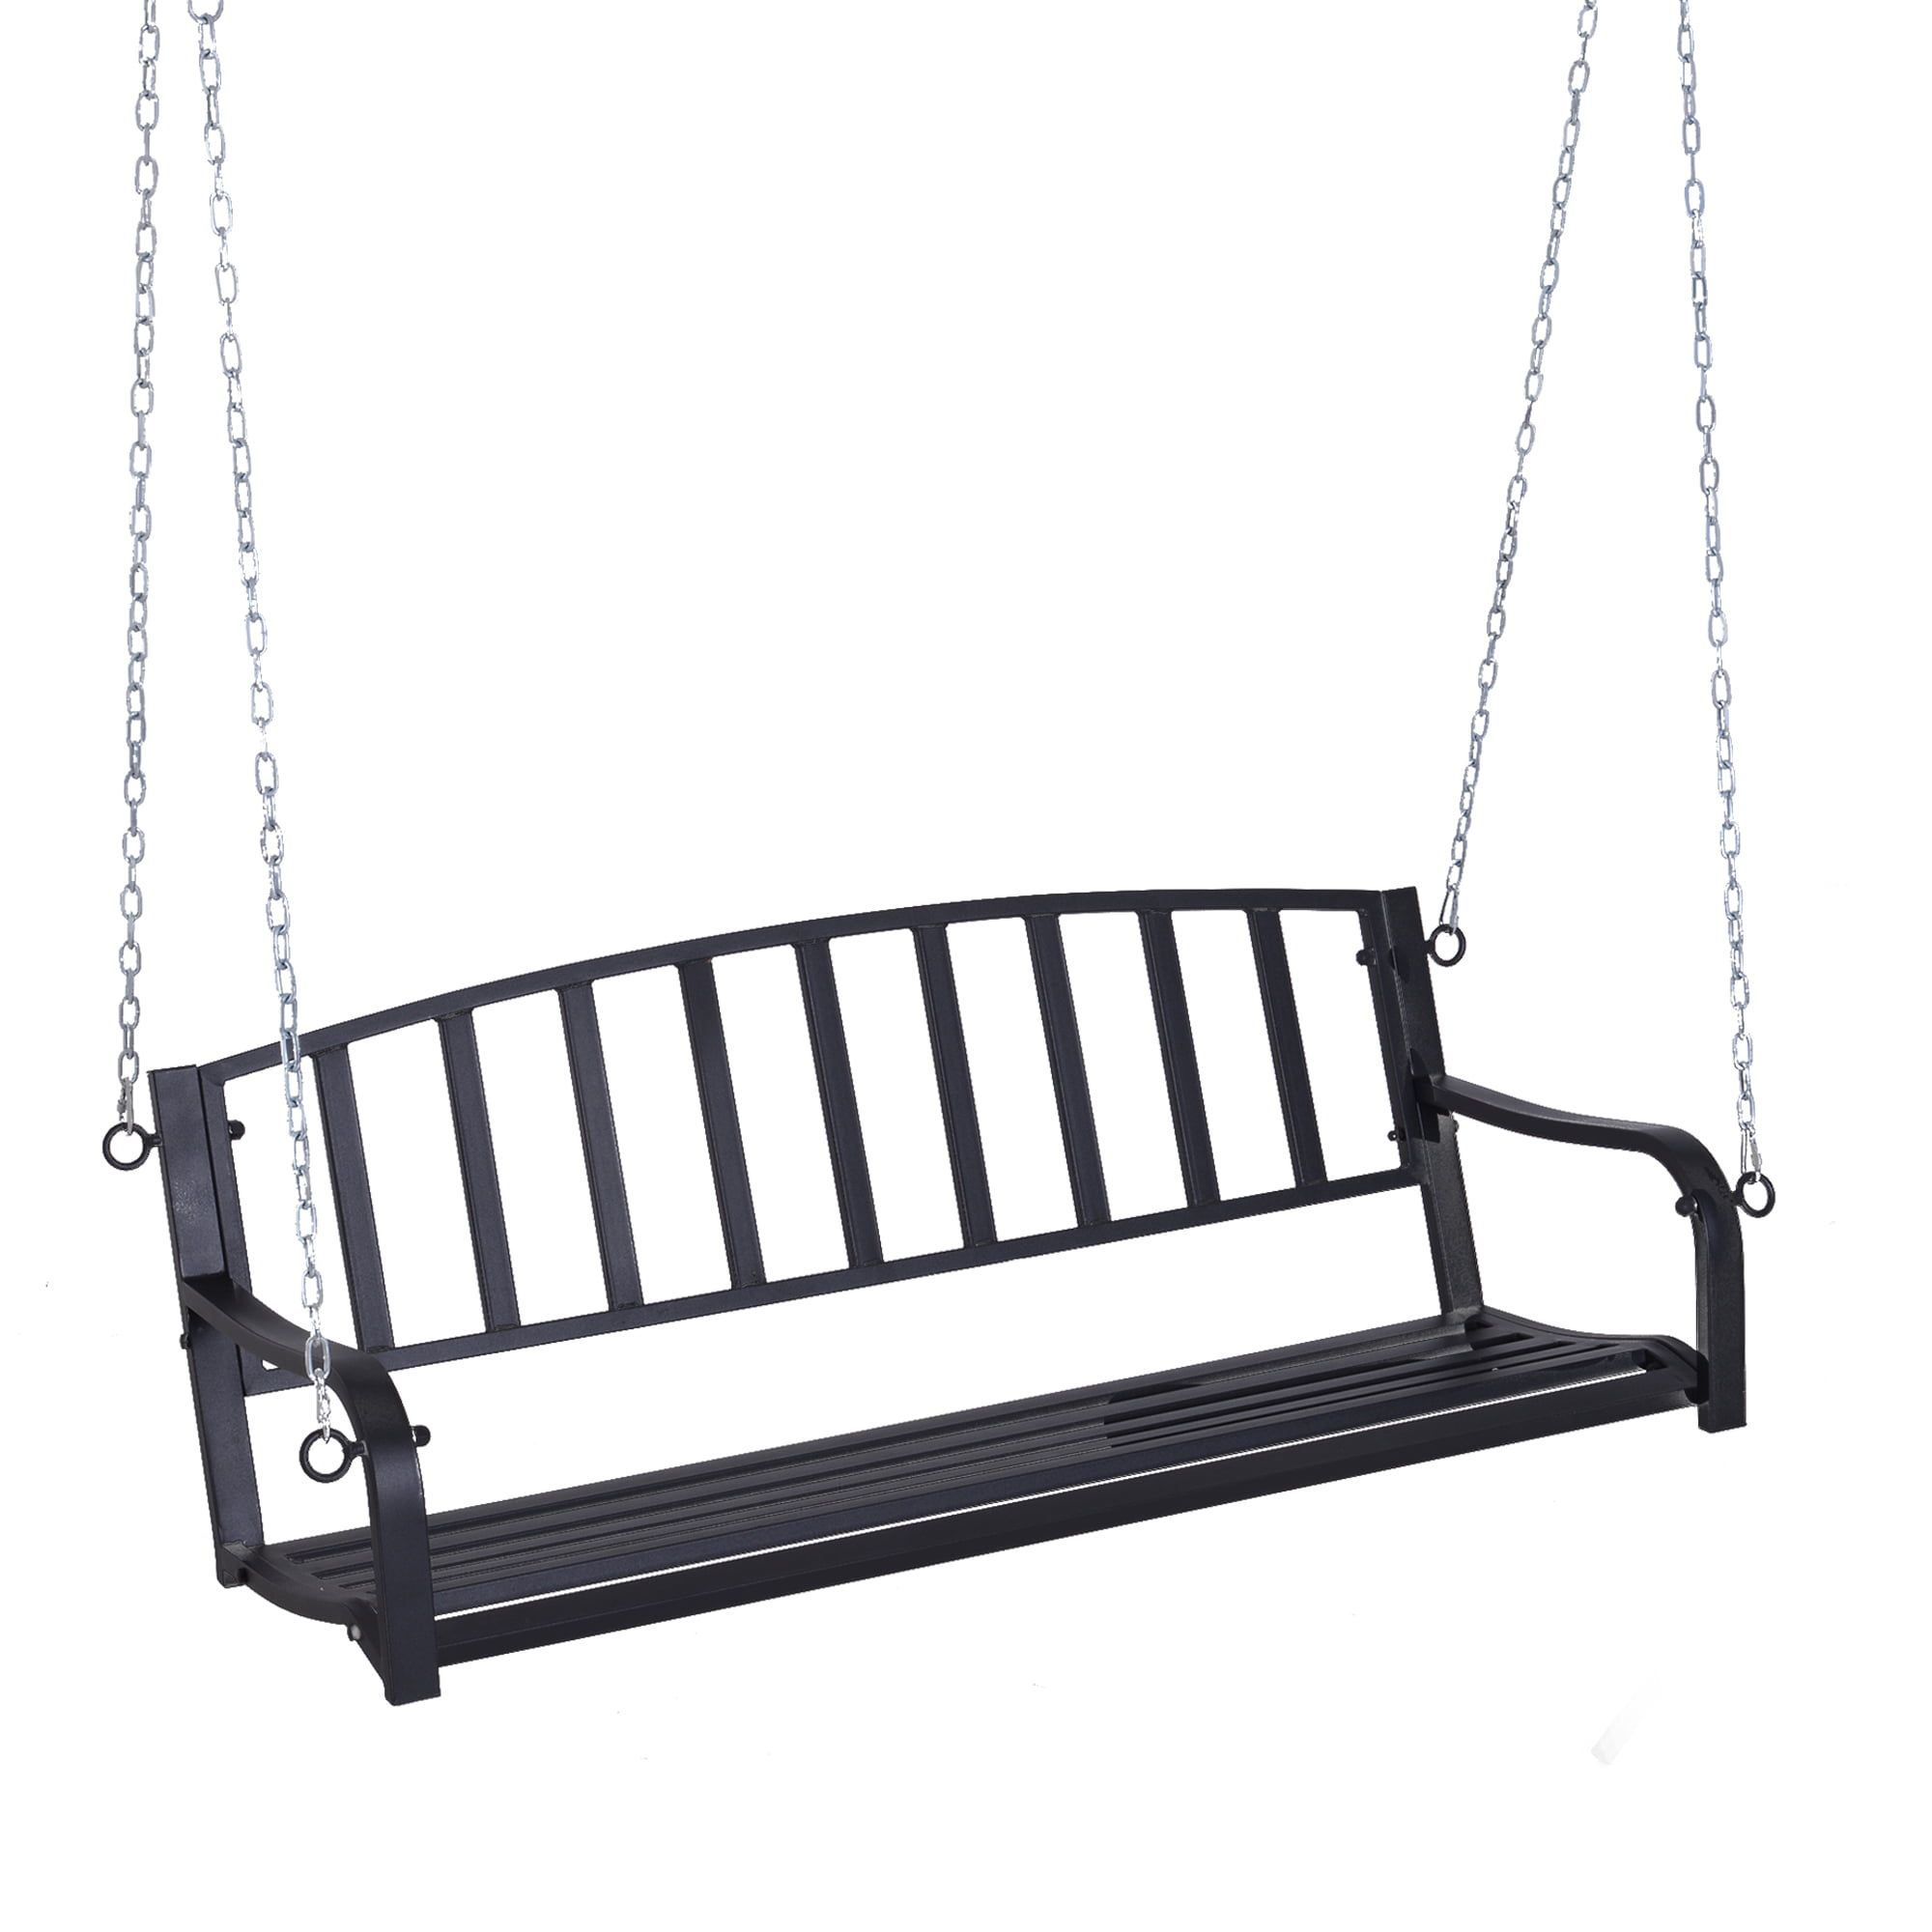 Outsunny 50 Porch Swing Hanging Bench Outdoor Glider Chair with Chain Black